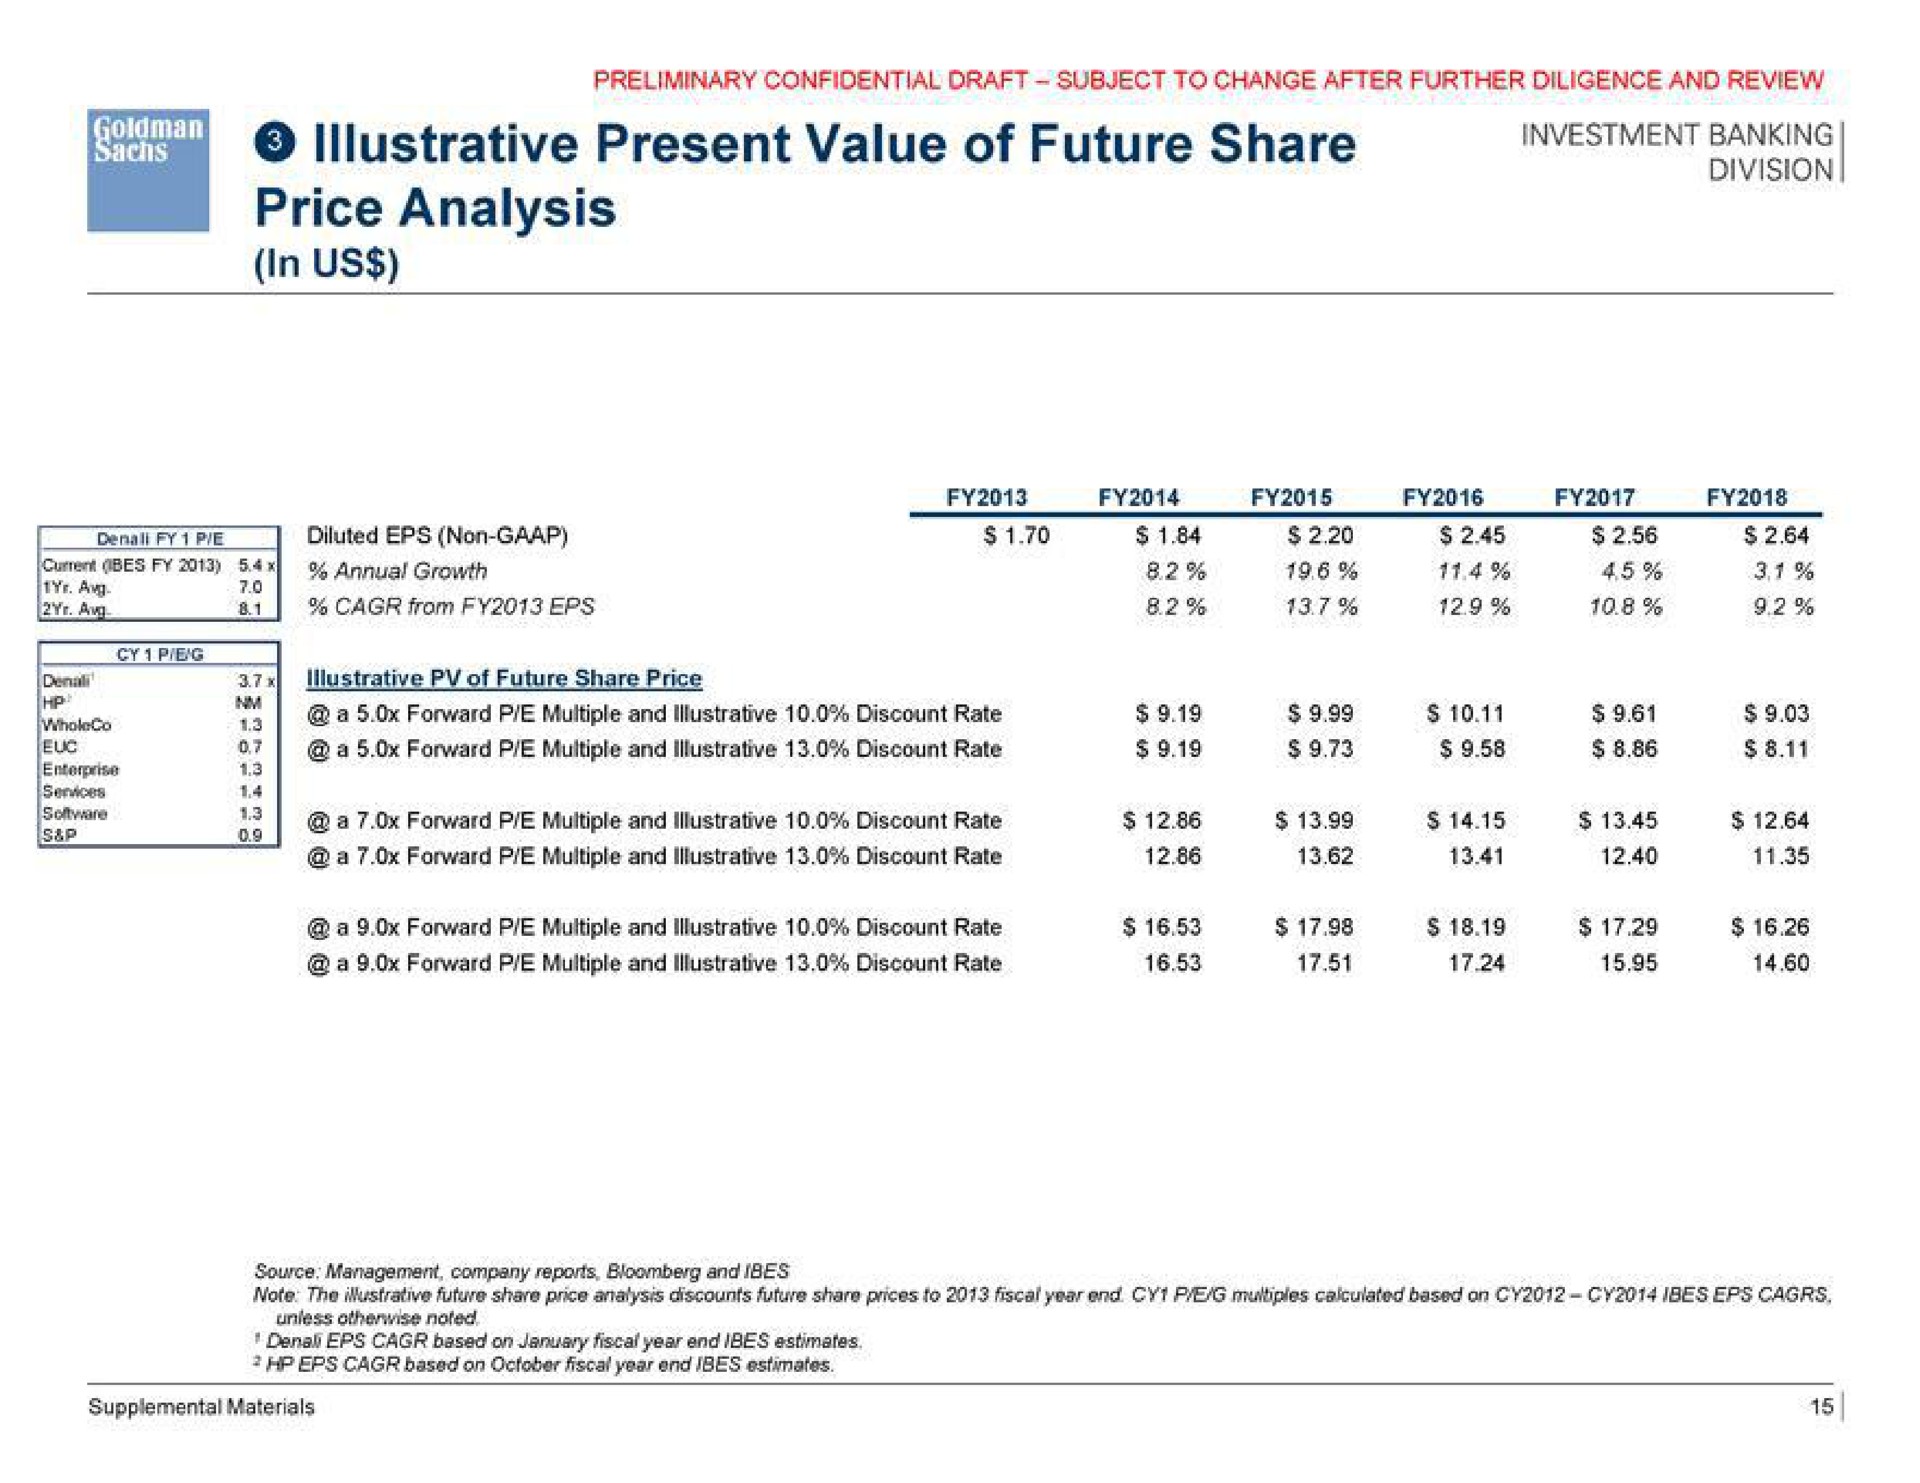 illustrative present value of future share price analysis in us area stent | Goldman Sachs